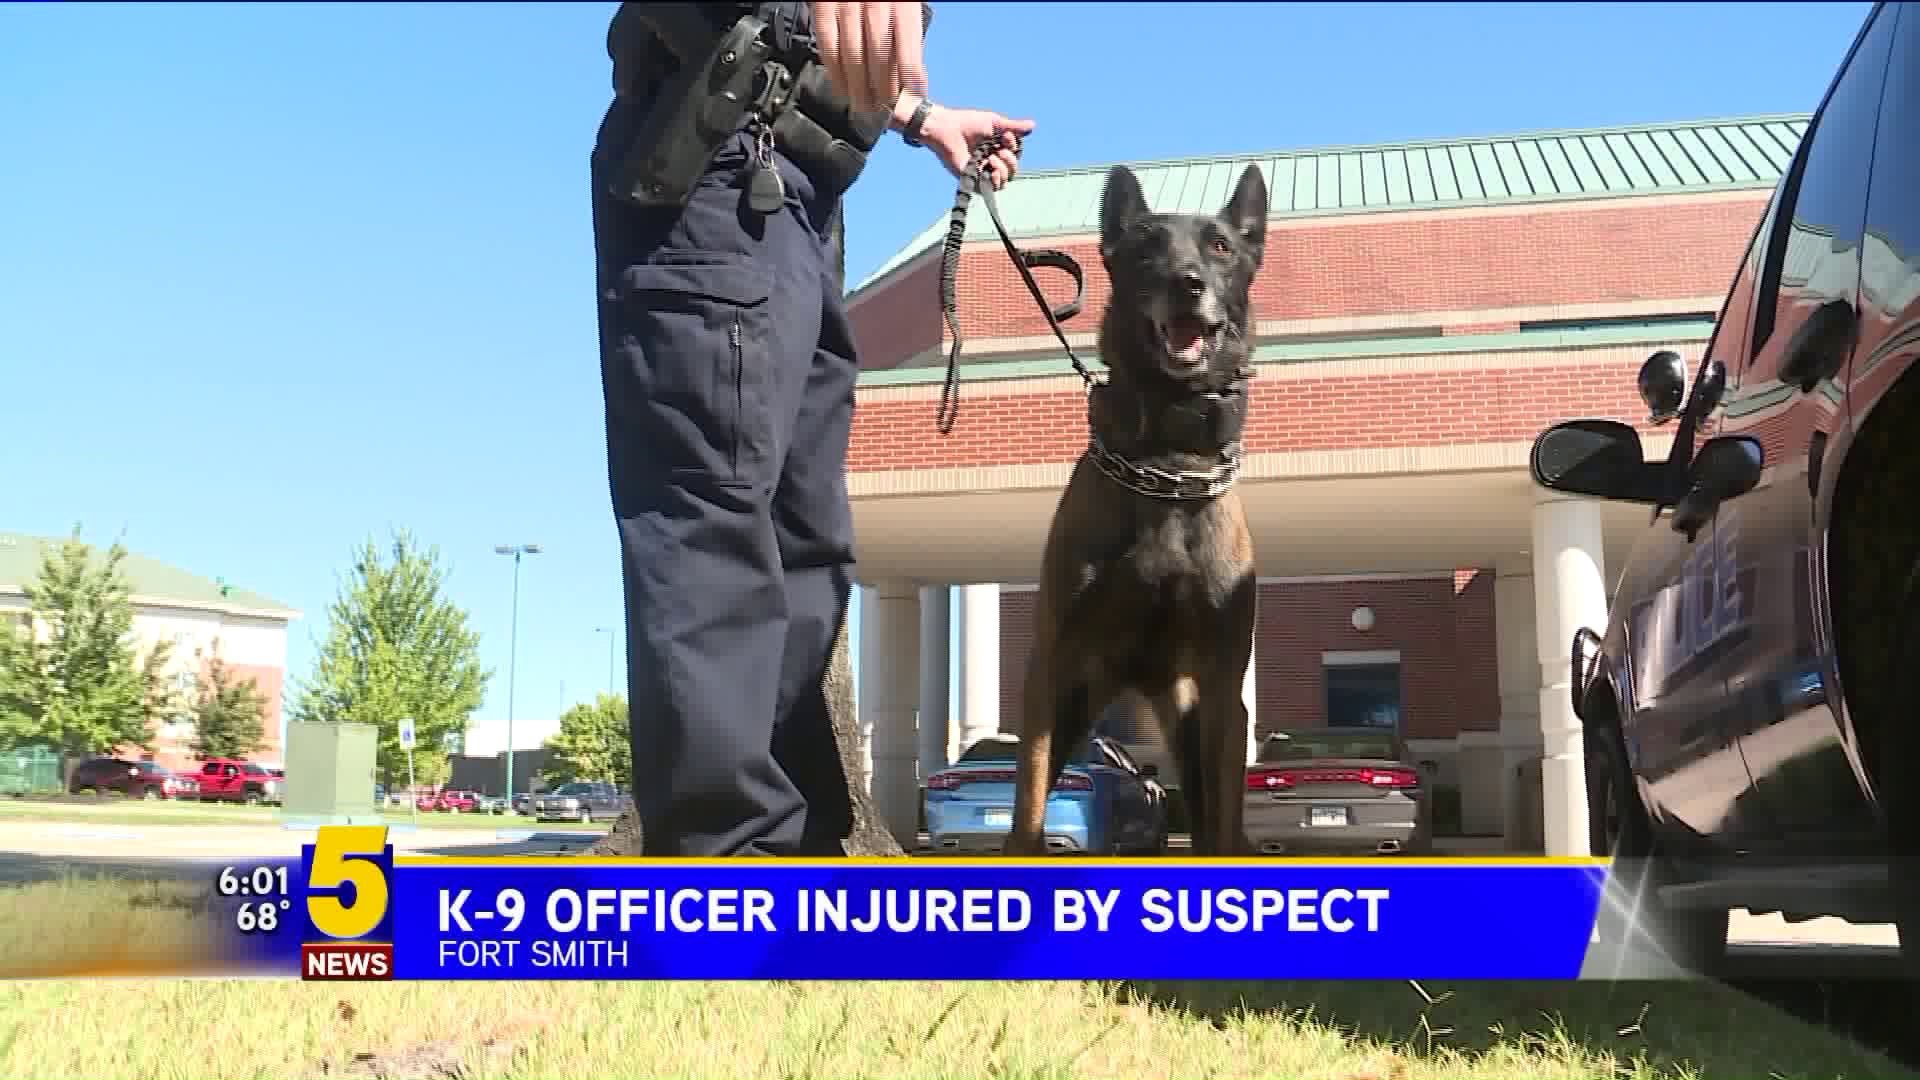 K9 Officer Injured By Suspect In Pursuit